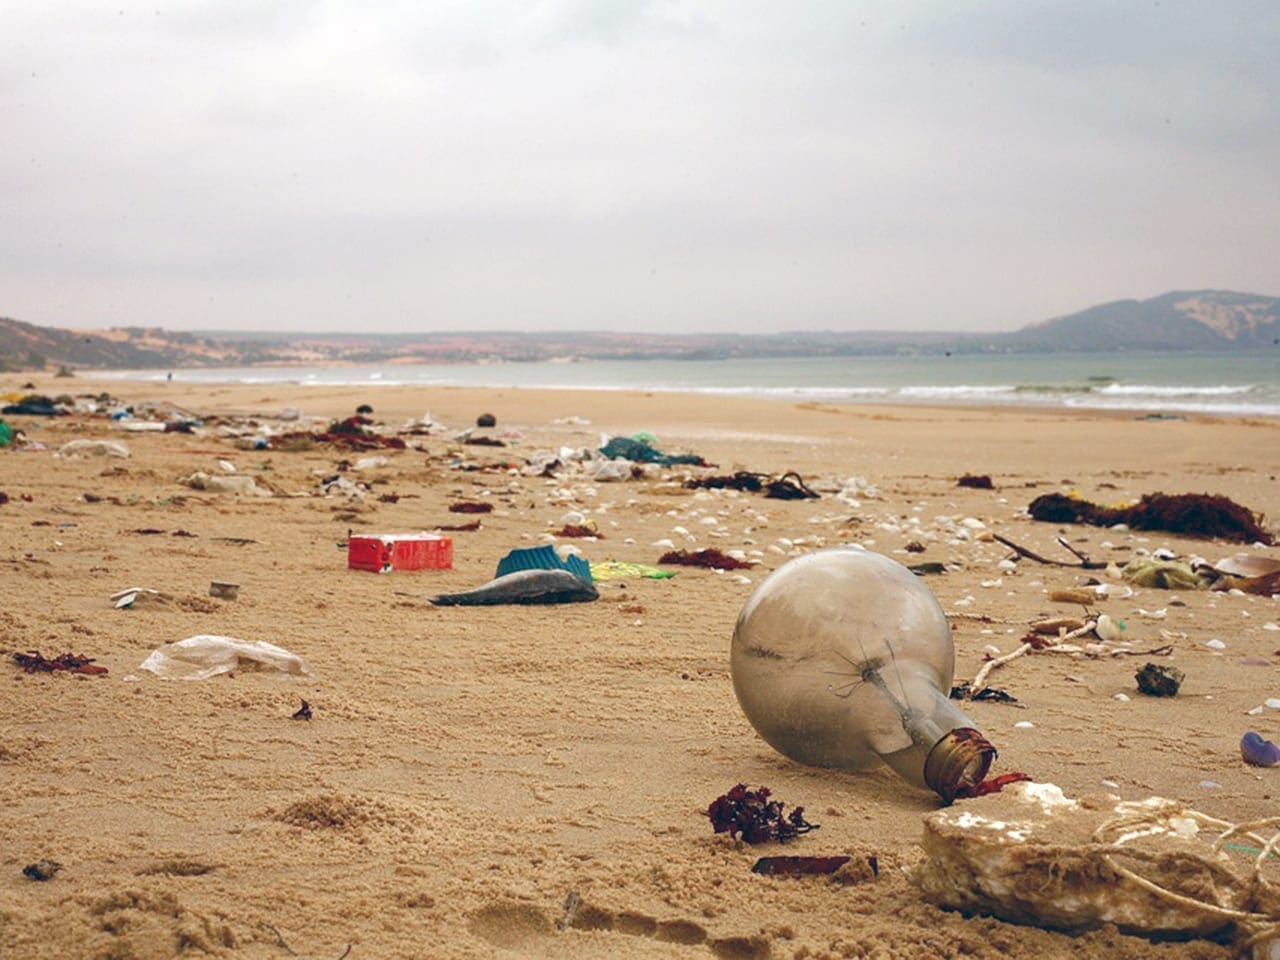 Portrait of environmental pollution on a beach caused by the use and disposal of single-use plastic.